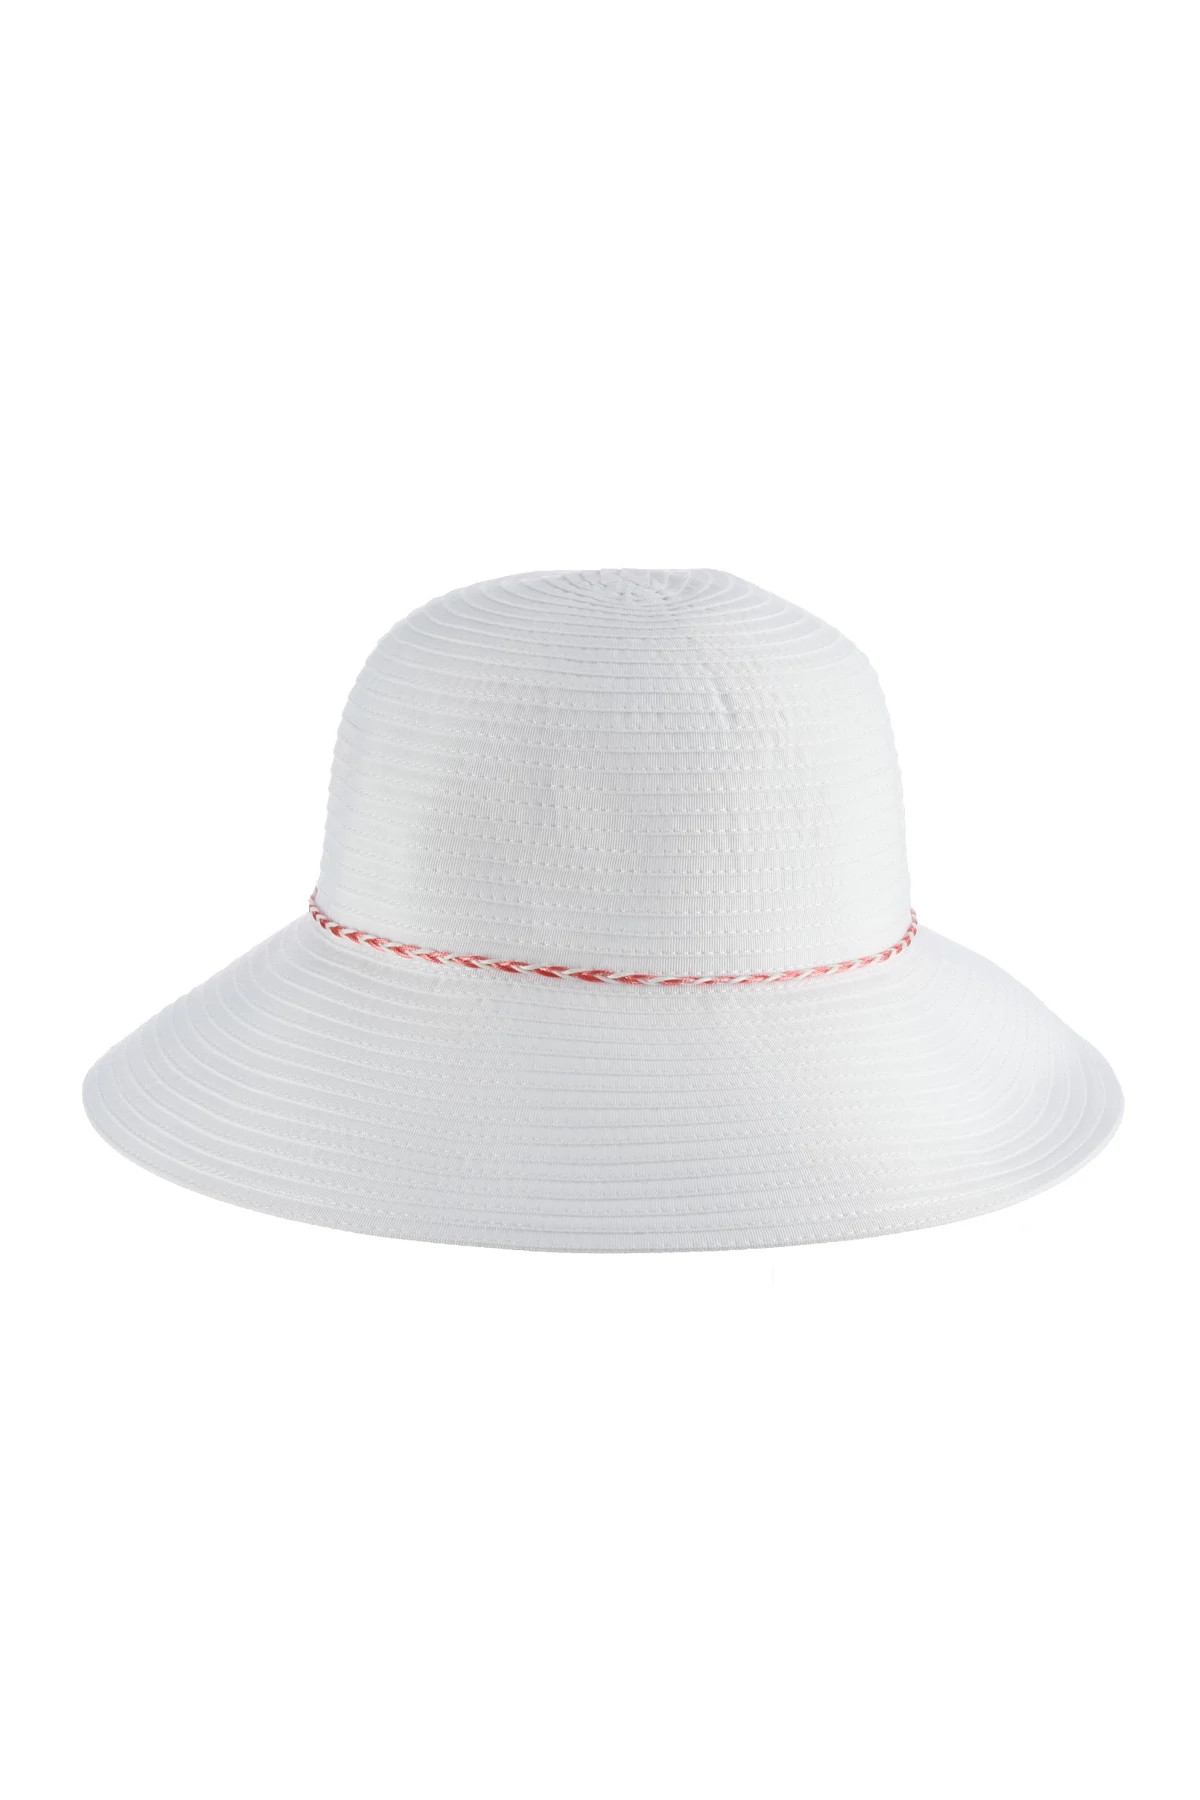 WHITE Ribbon Cord Bucket Hat image number 3